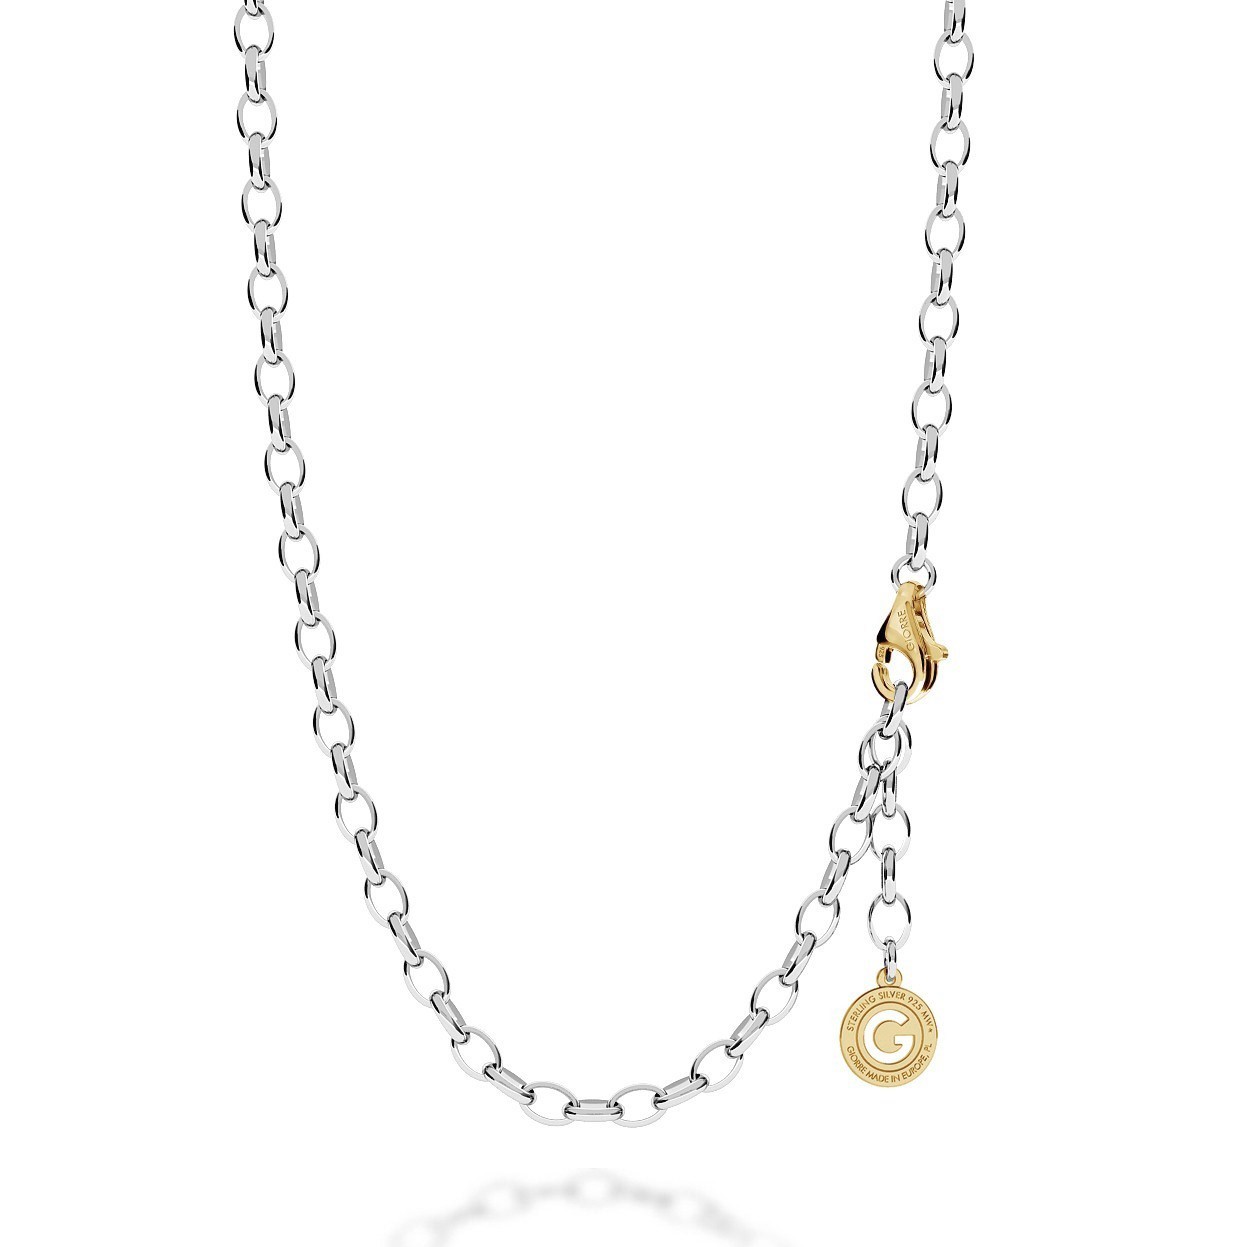 Sterling silver necklace 55-65 cm light rhodium, yellow gold clasp, link 7x5 mm